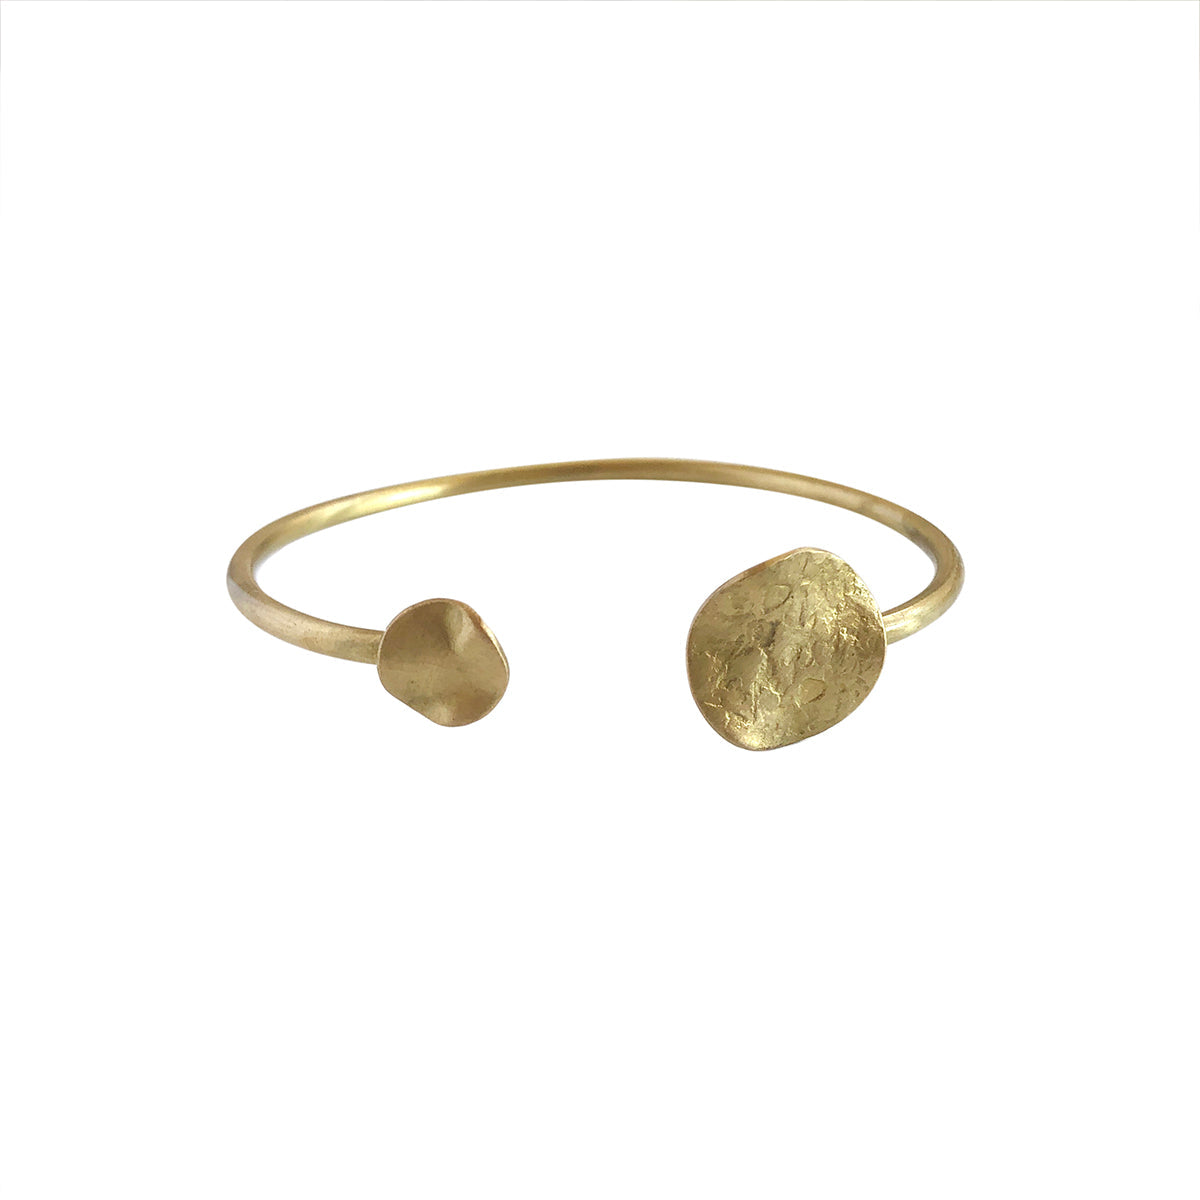 Image of the gold Solaris Cuff, on a white background.